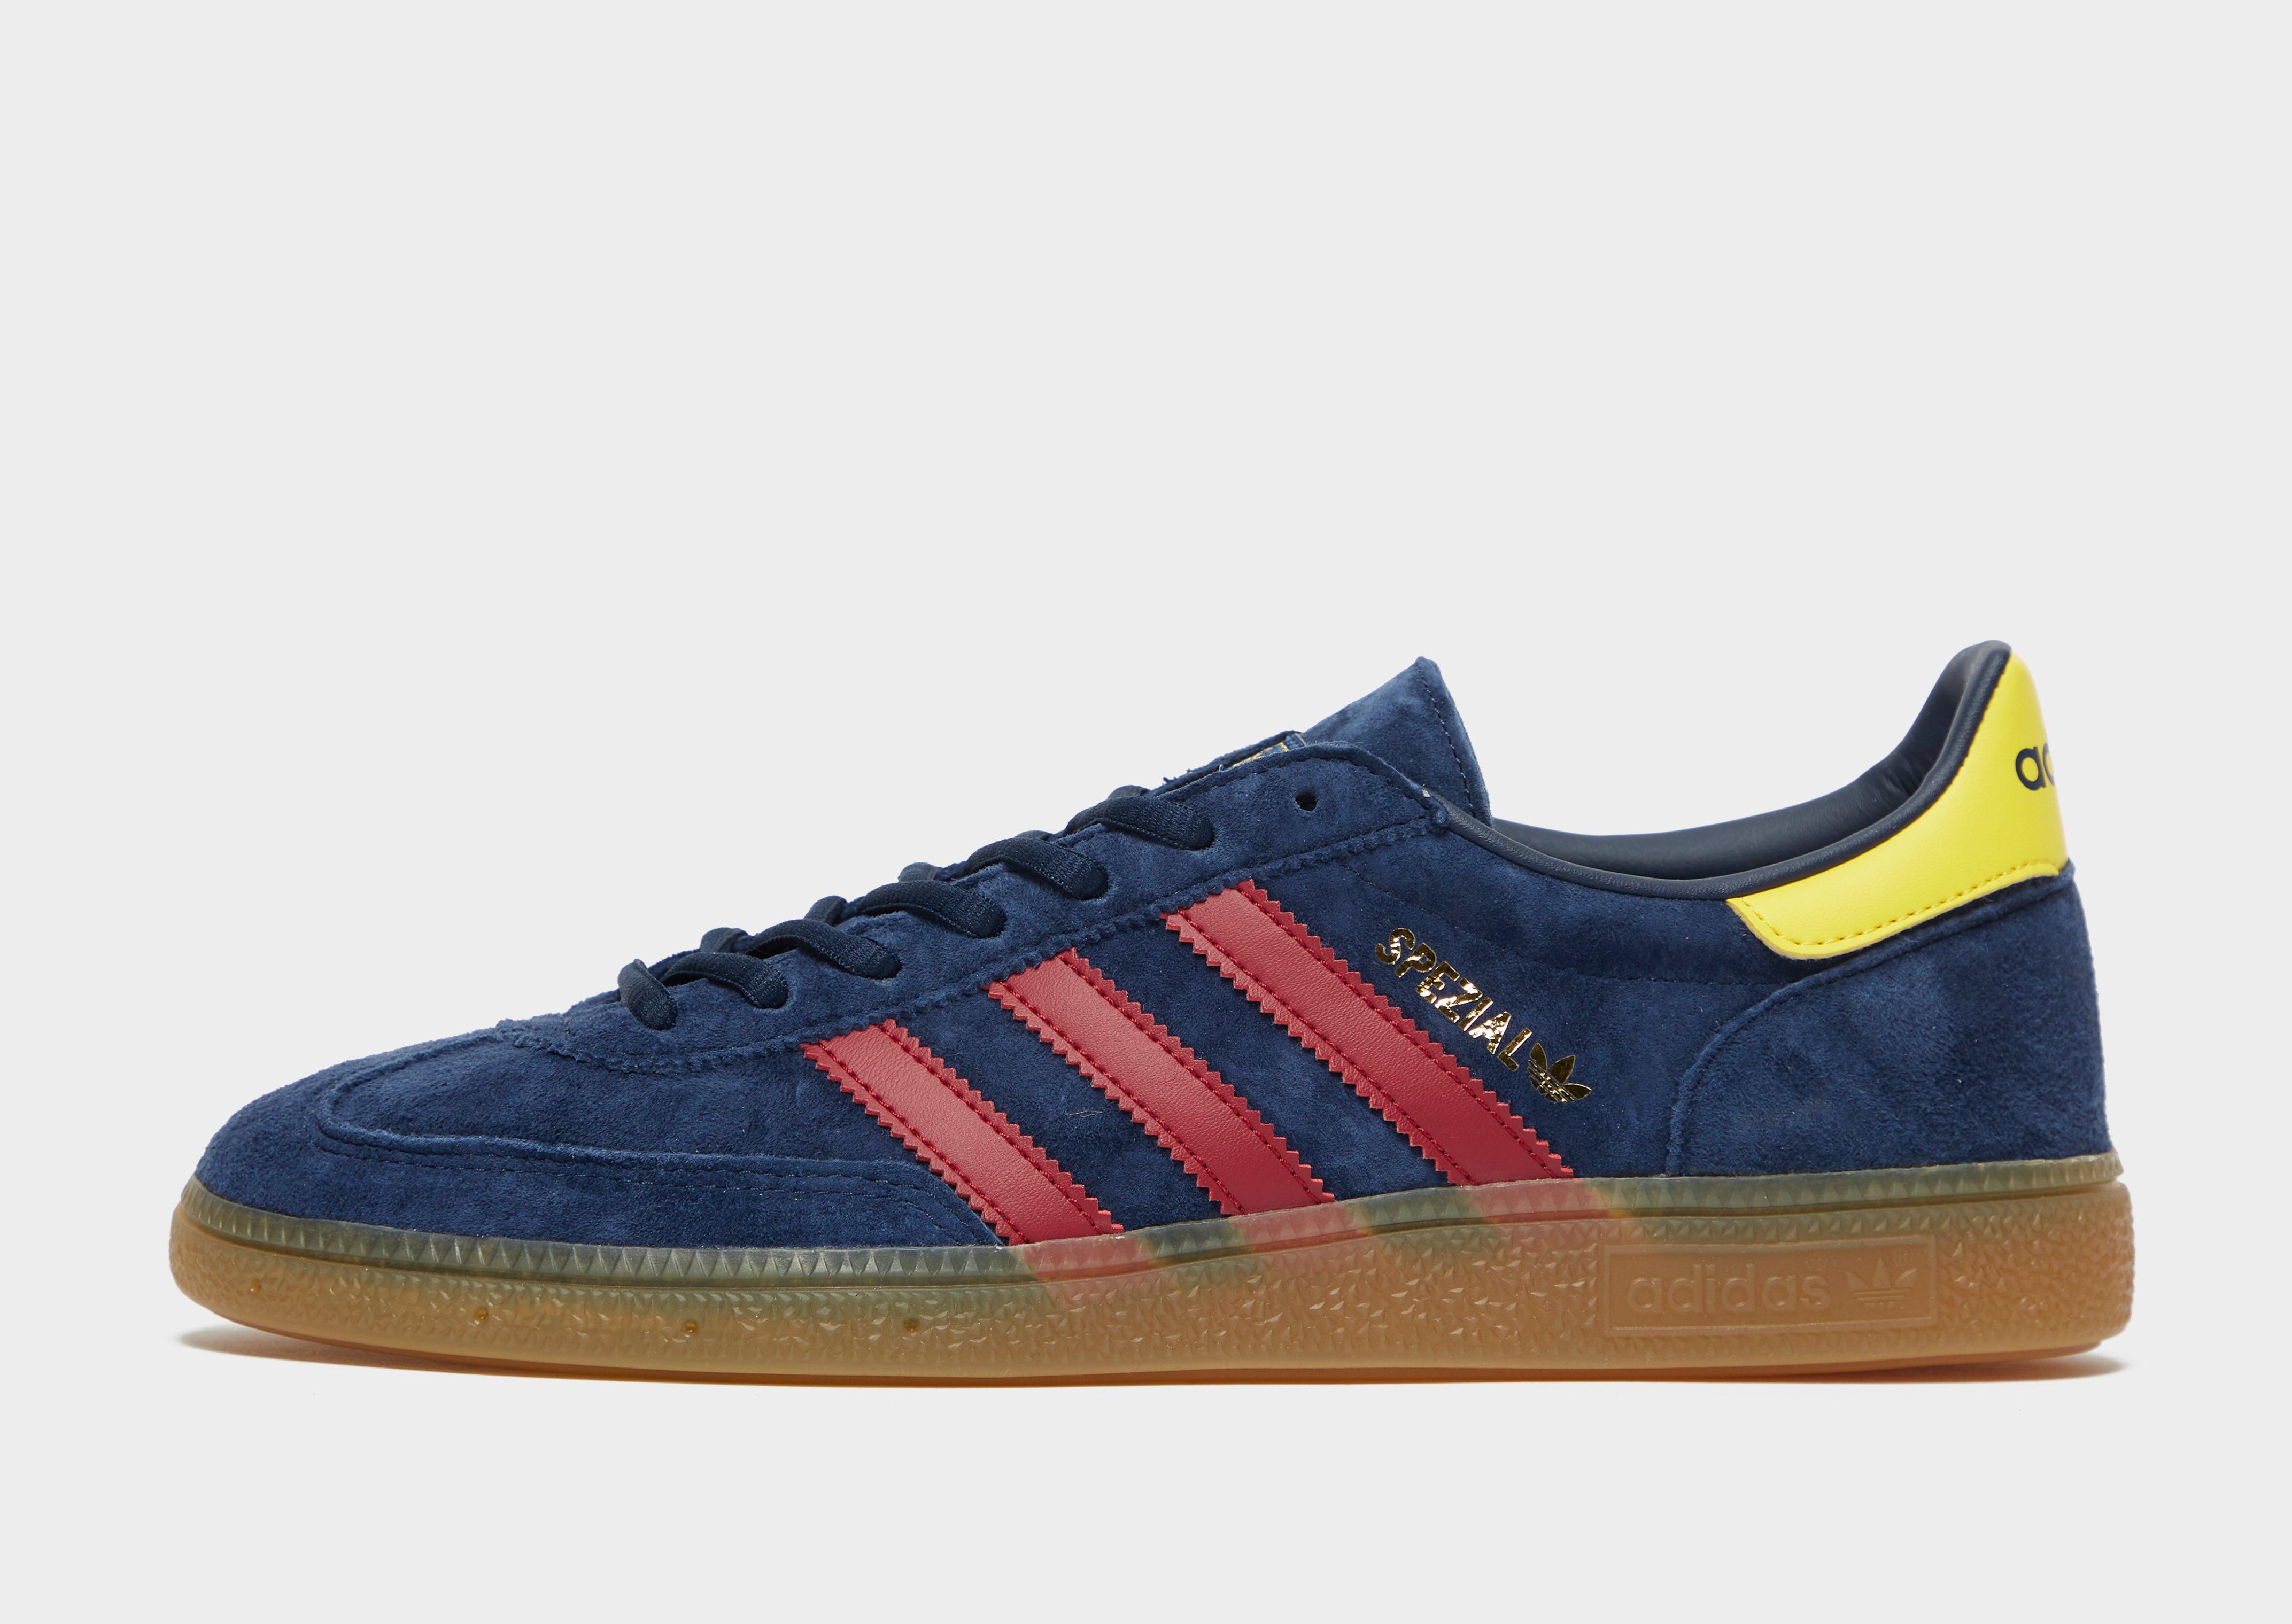 adidas micropacer blue